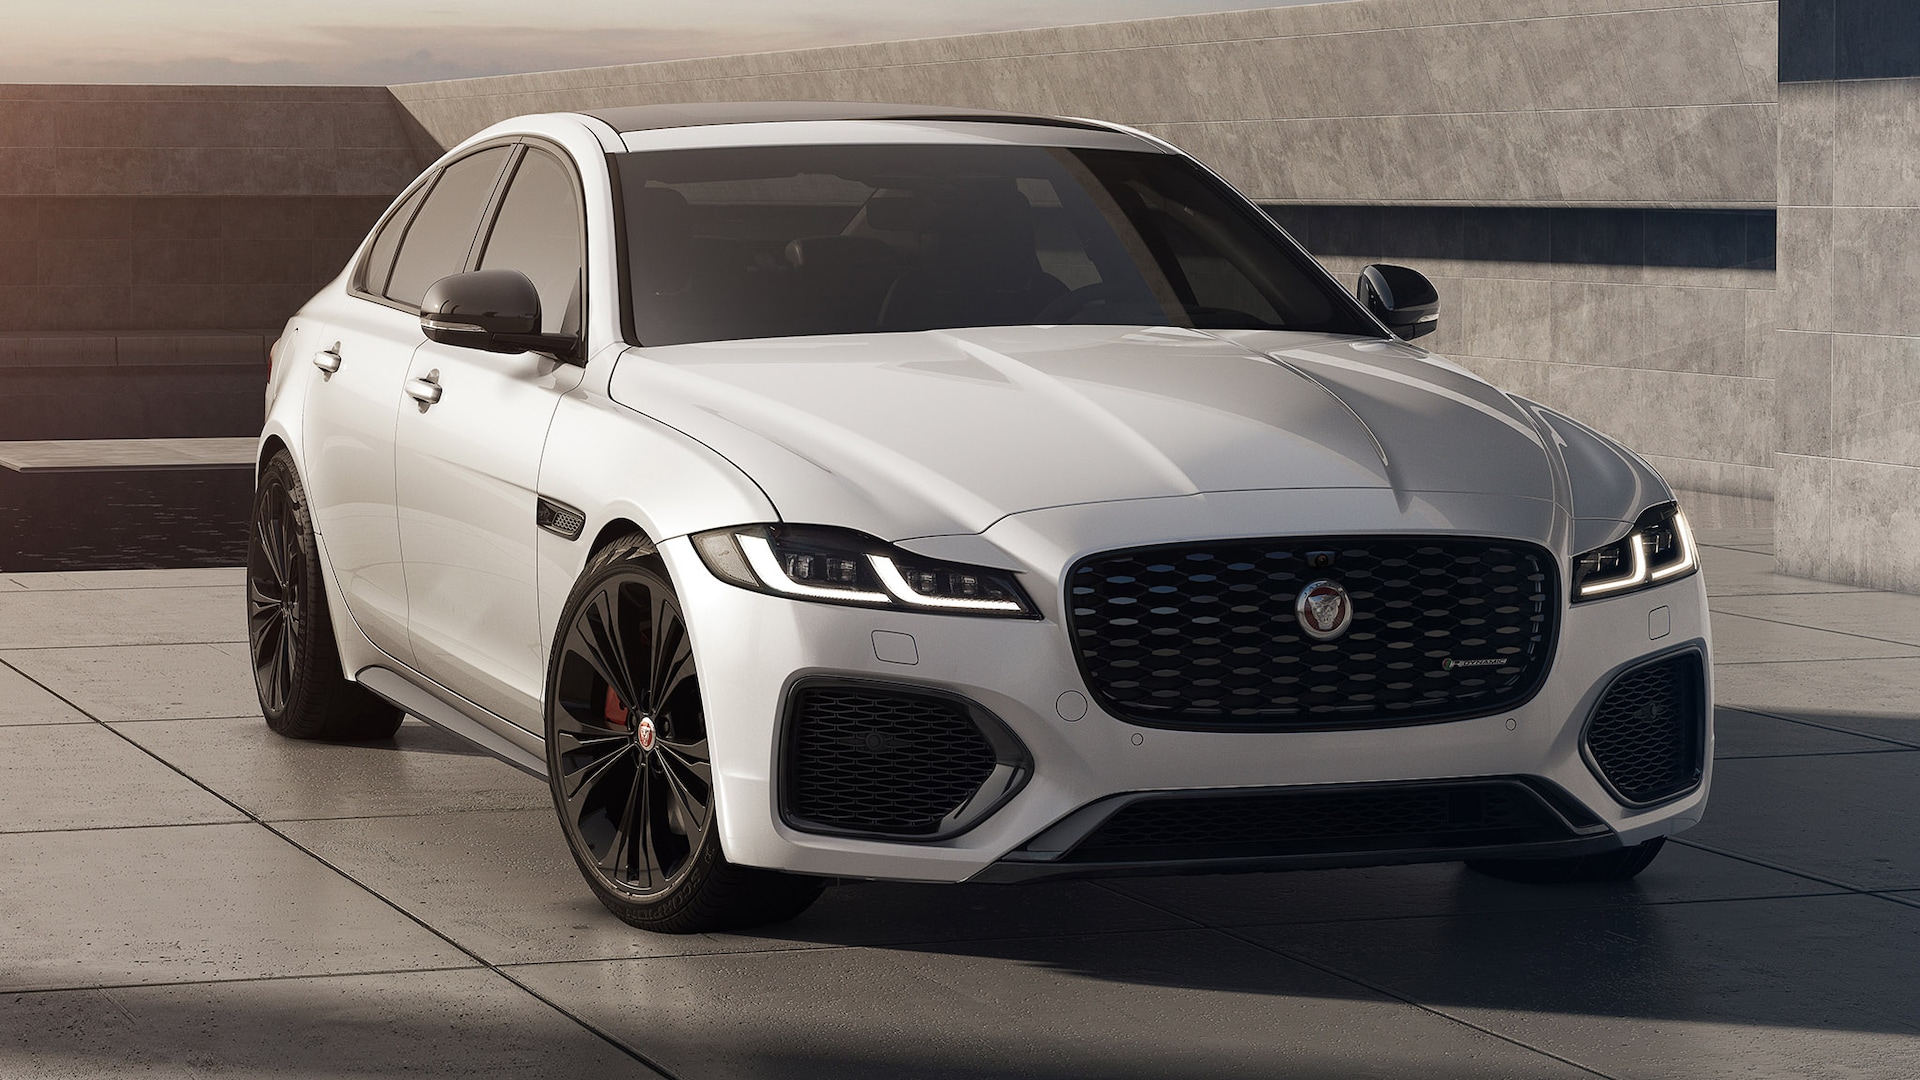 2022 Jaguar XF Prices, Reviews, and Photos - MotorTrend